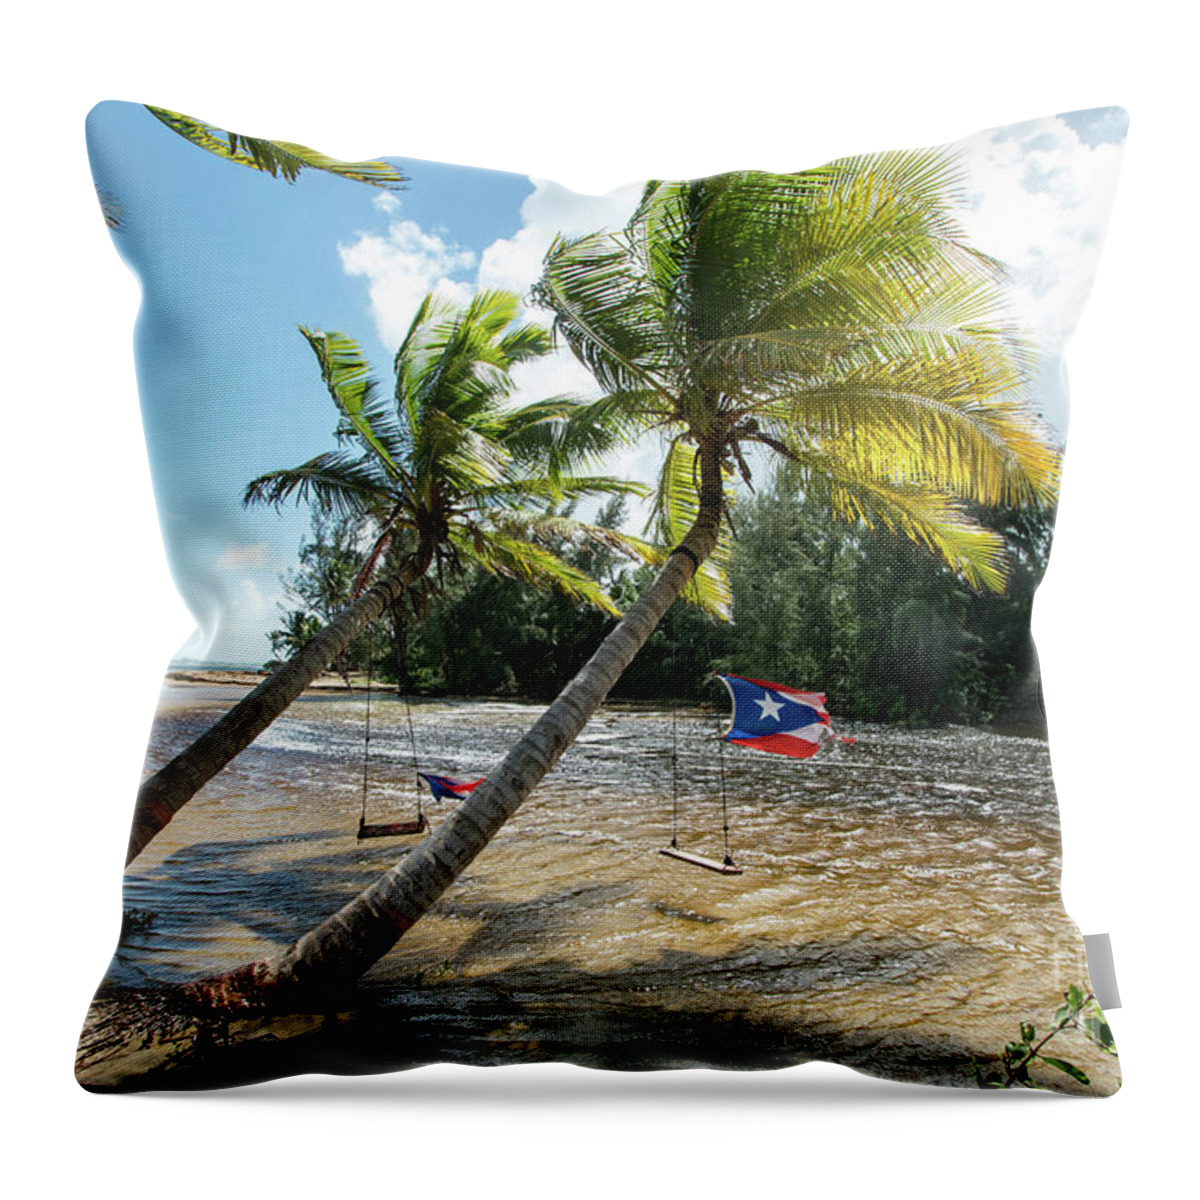 Swinging Throw Pillow featuring the photograph Swinging Under The Palm Trees, Loiza, Puerto Rico by Beachtown Views